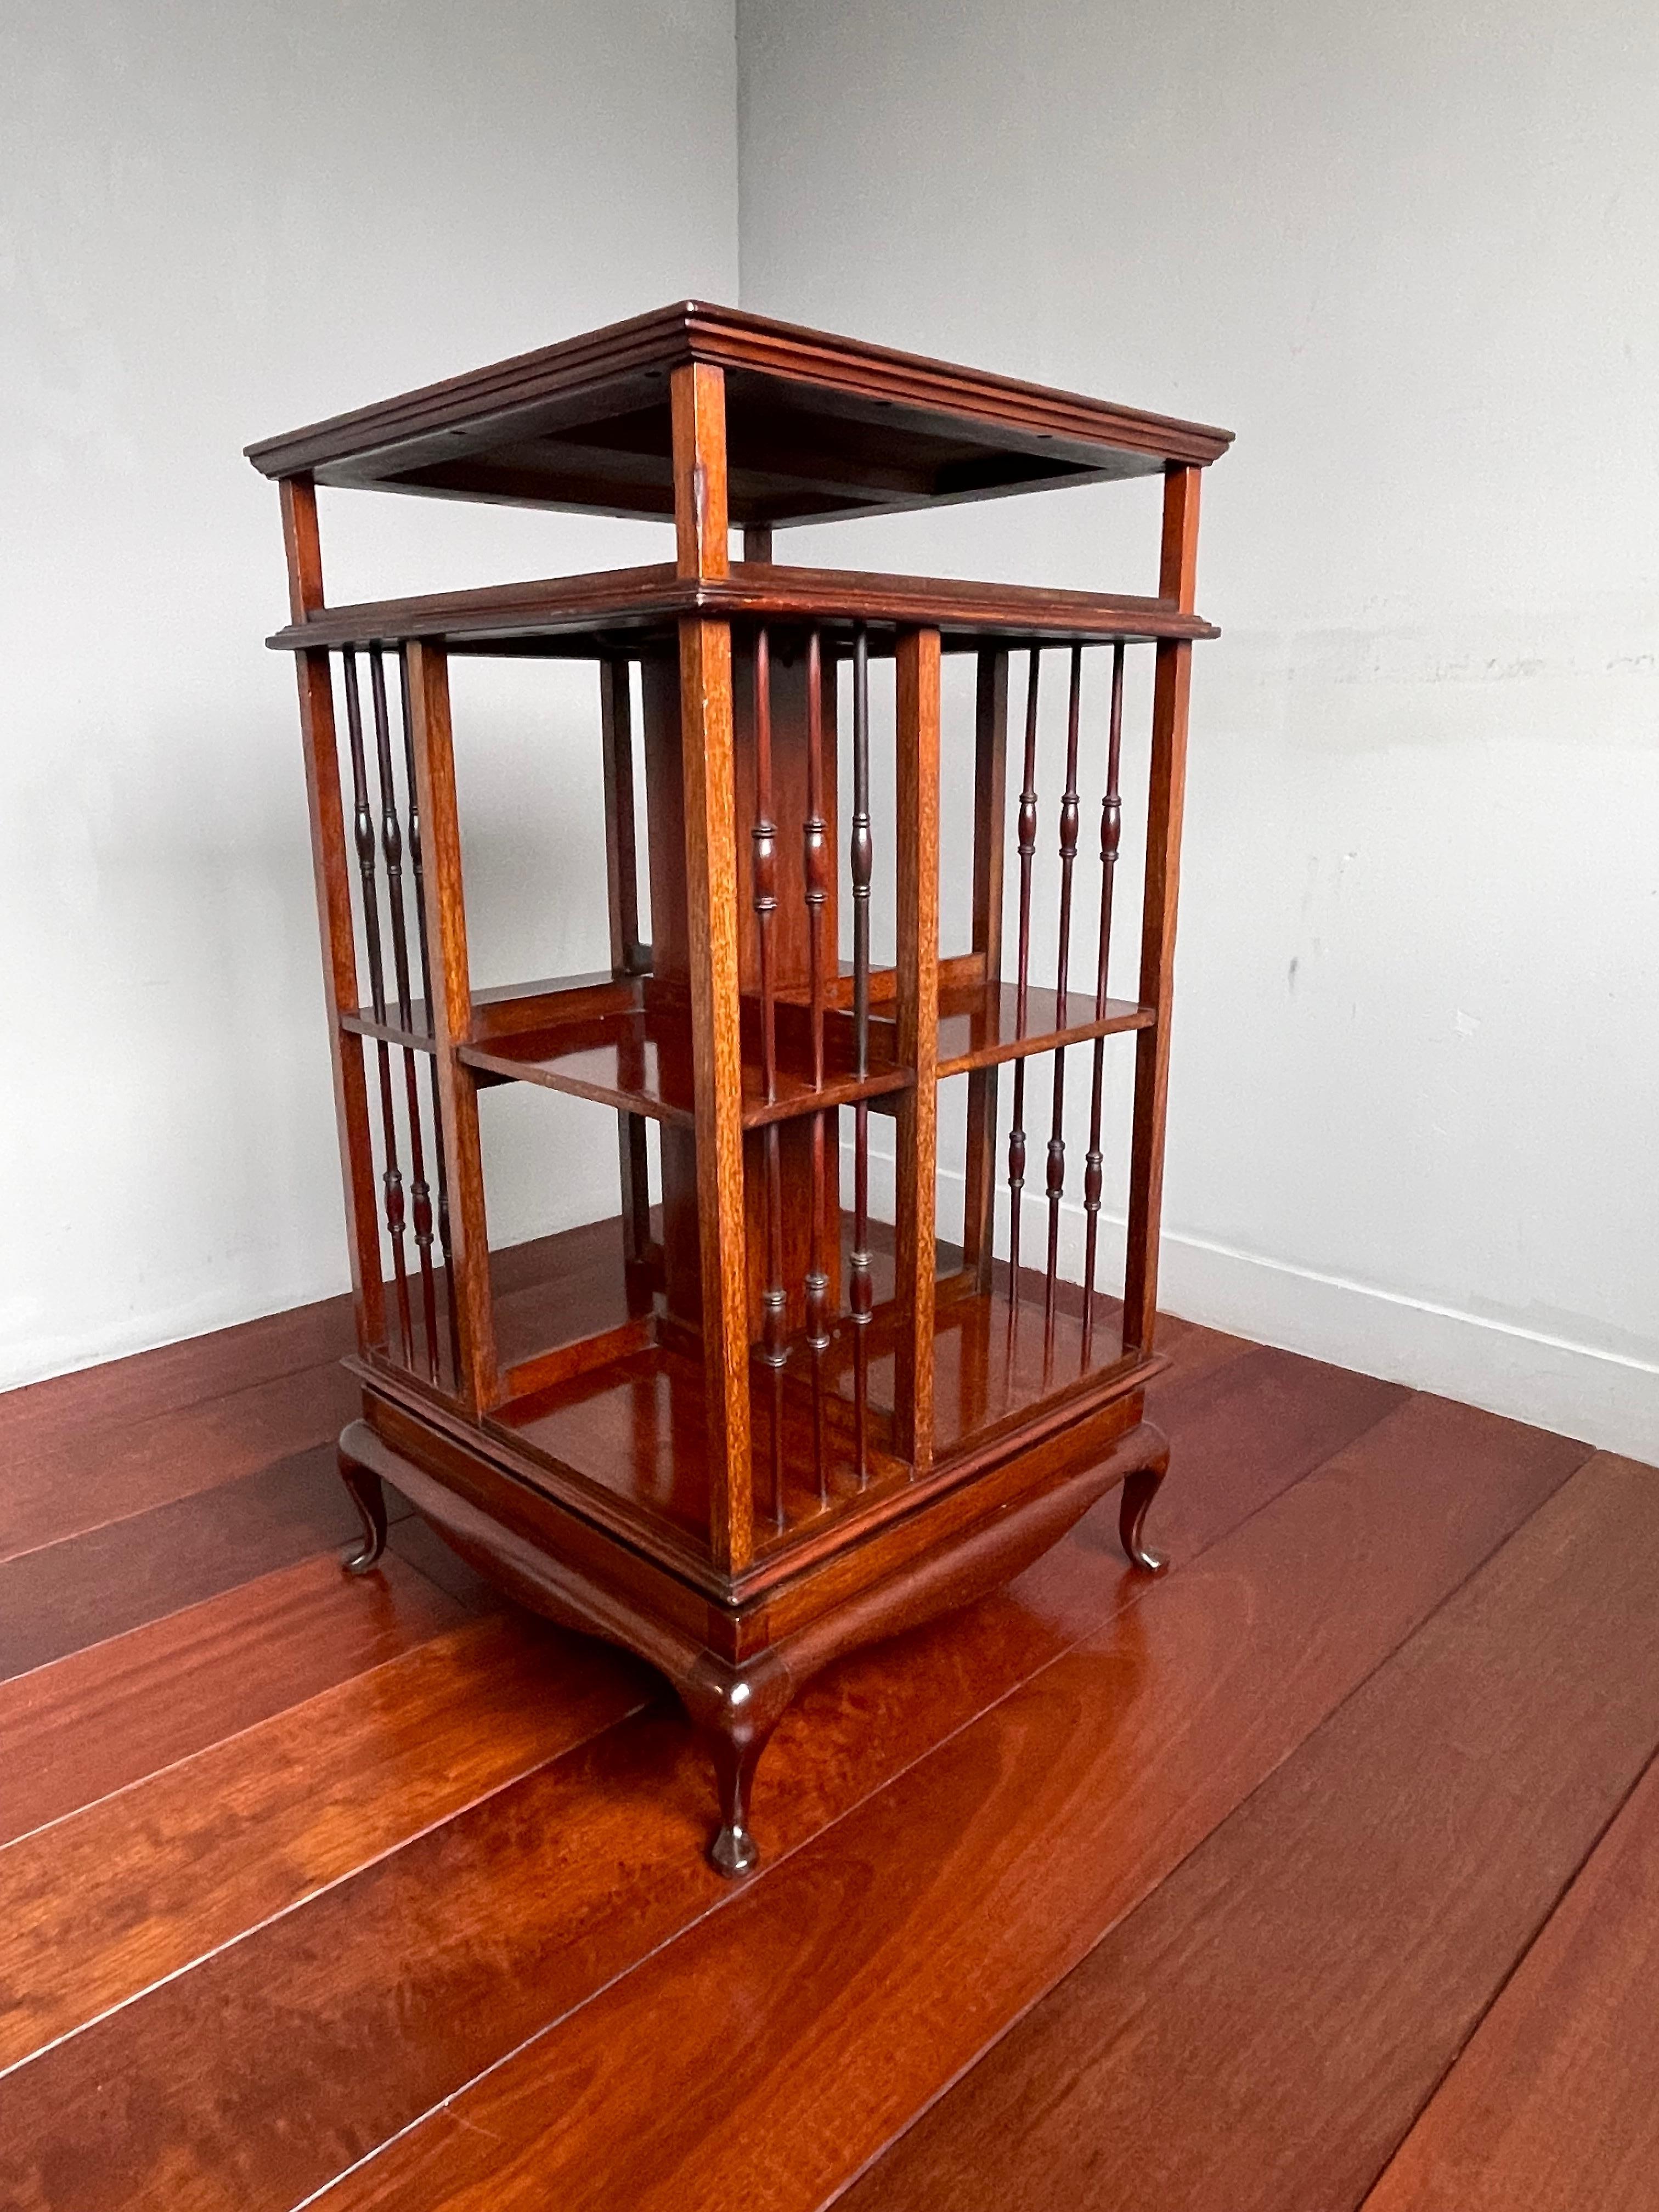 Striking and practical size bookcase by Shoolbred of England.

Apart from being rare, stylish and beautiful this late 1800s and all handcrafted revolving bookcase is extra practical, because of its relatively small size AND because of the extra tier